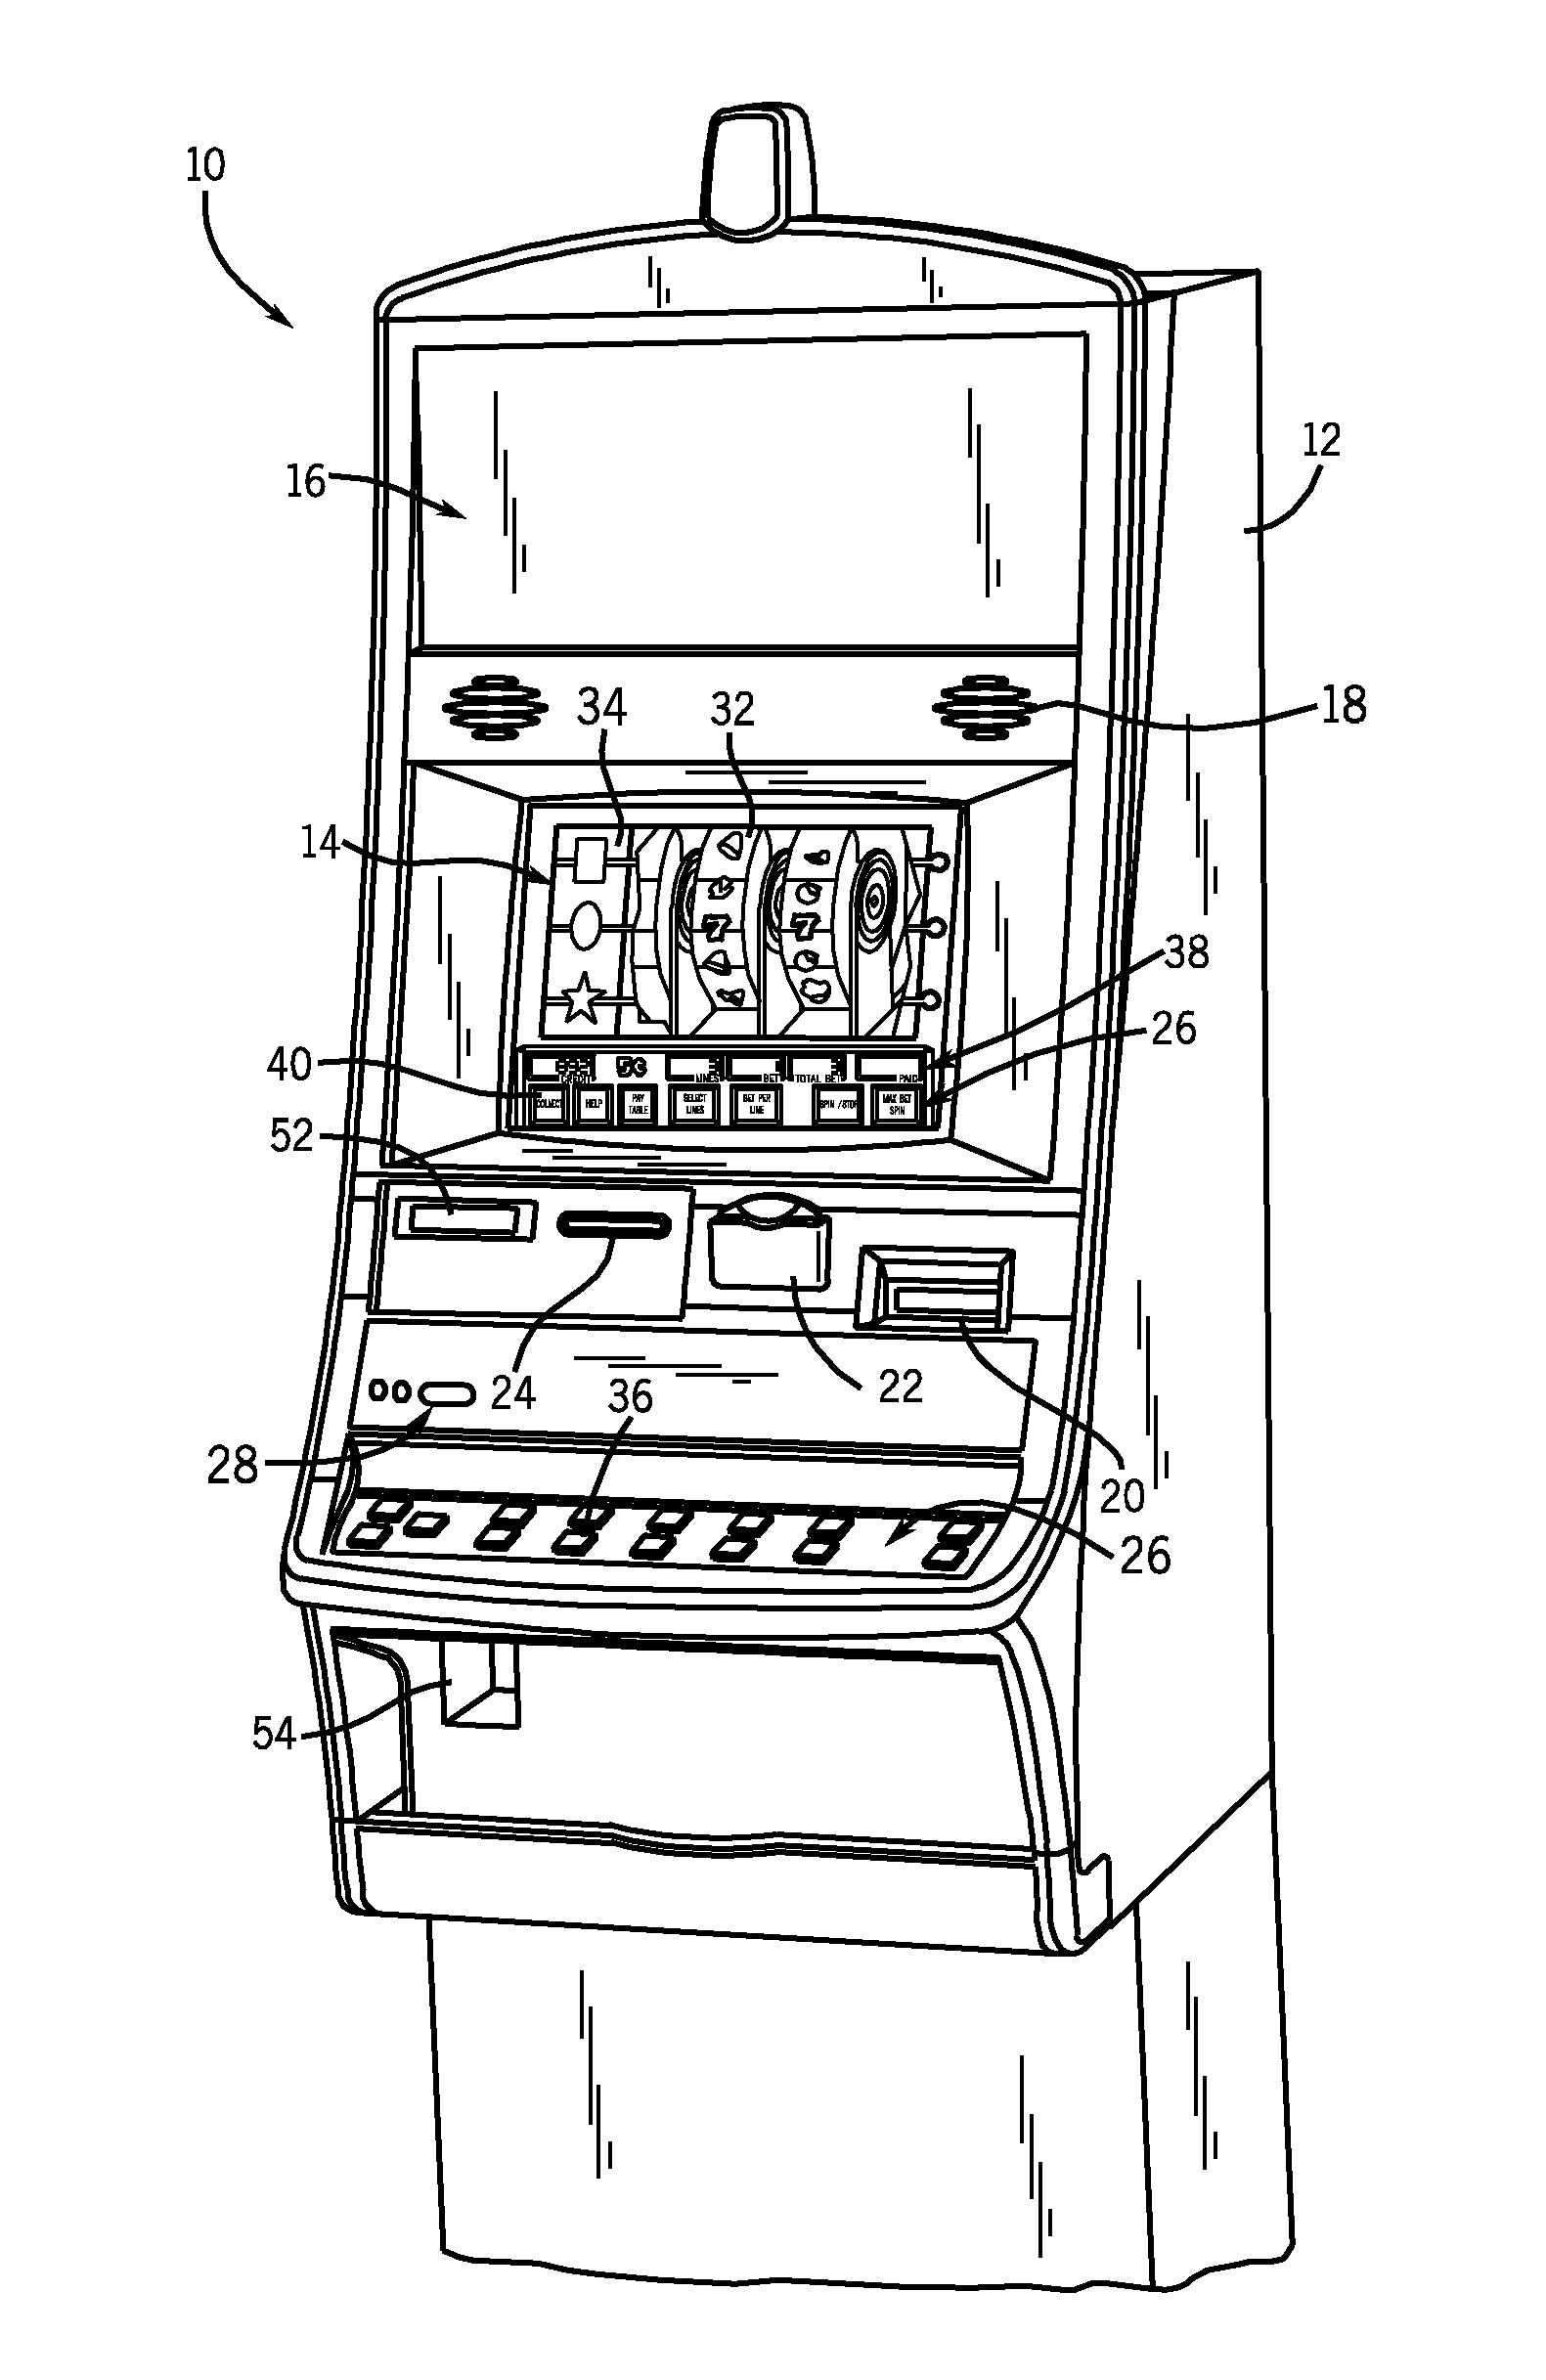 Devices, systems, and methods for dynamically simulating a component of a wagering game